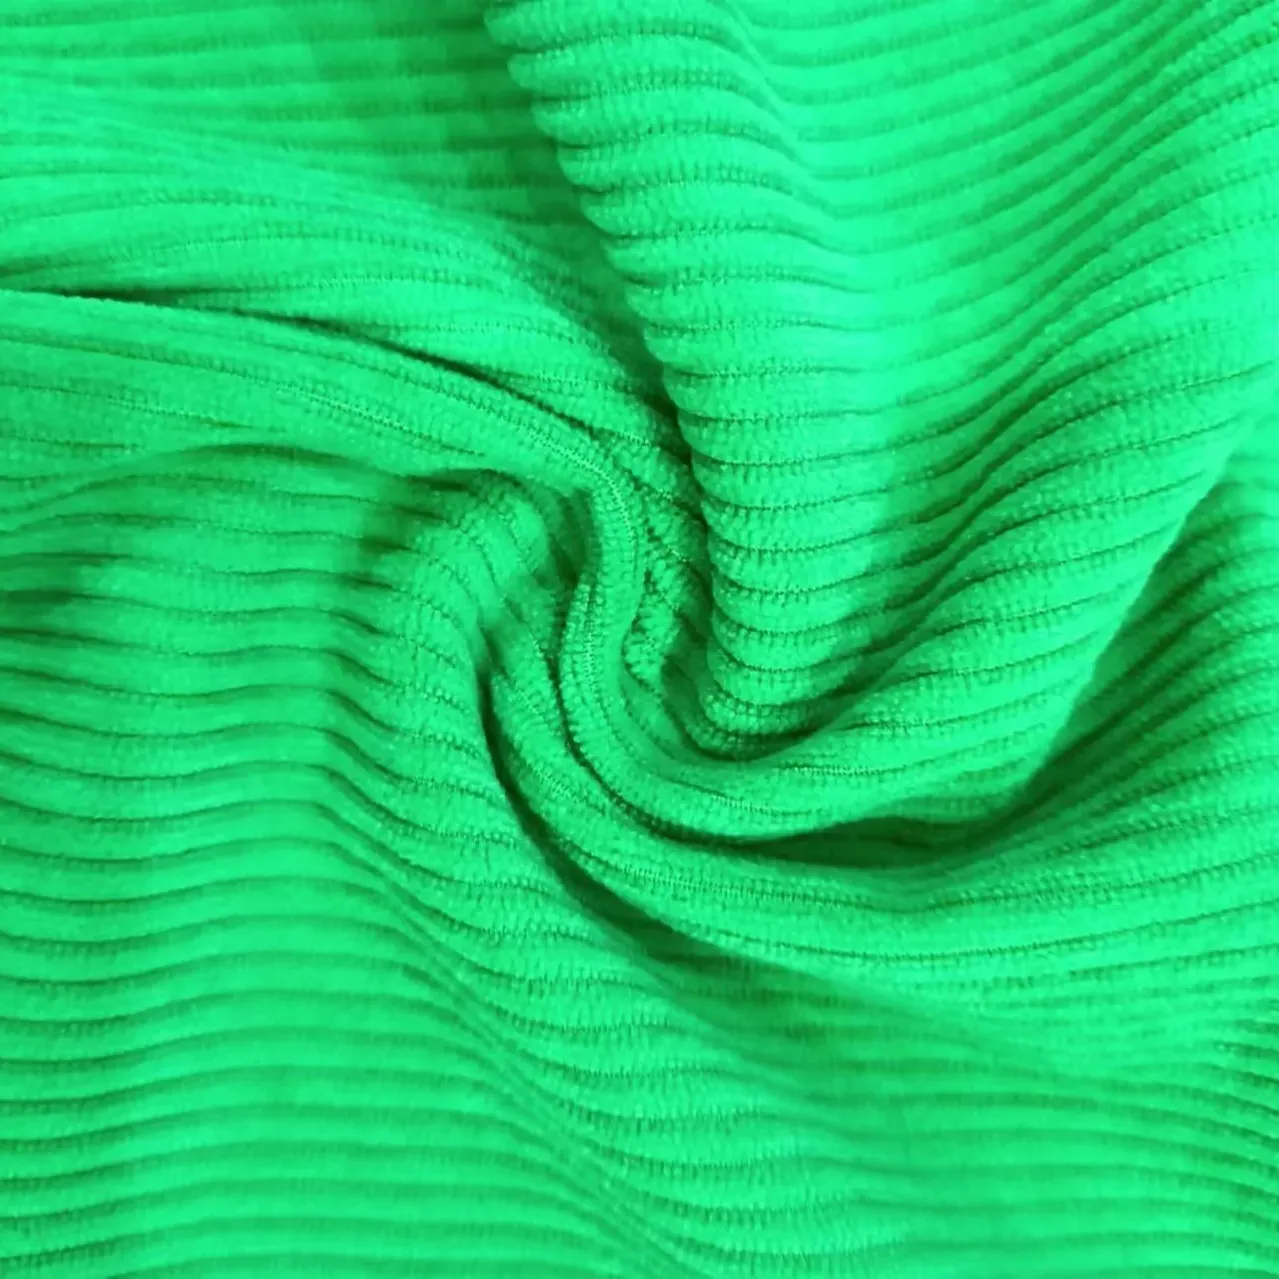 Oushida hot selling cut pile velvet fabric with 100%polyester can be made into garments dresses and home-textile cushion